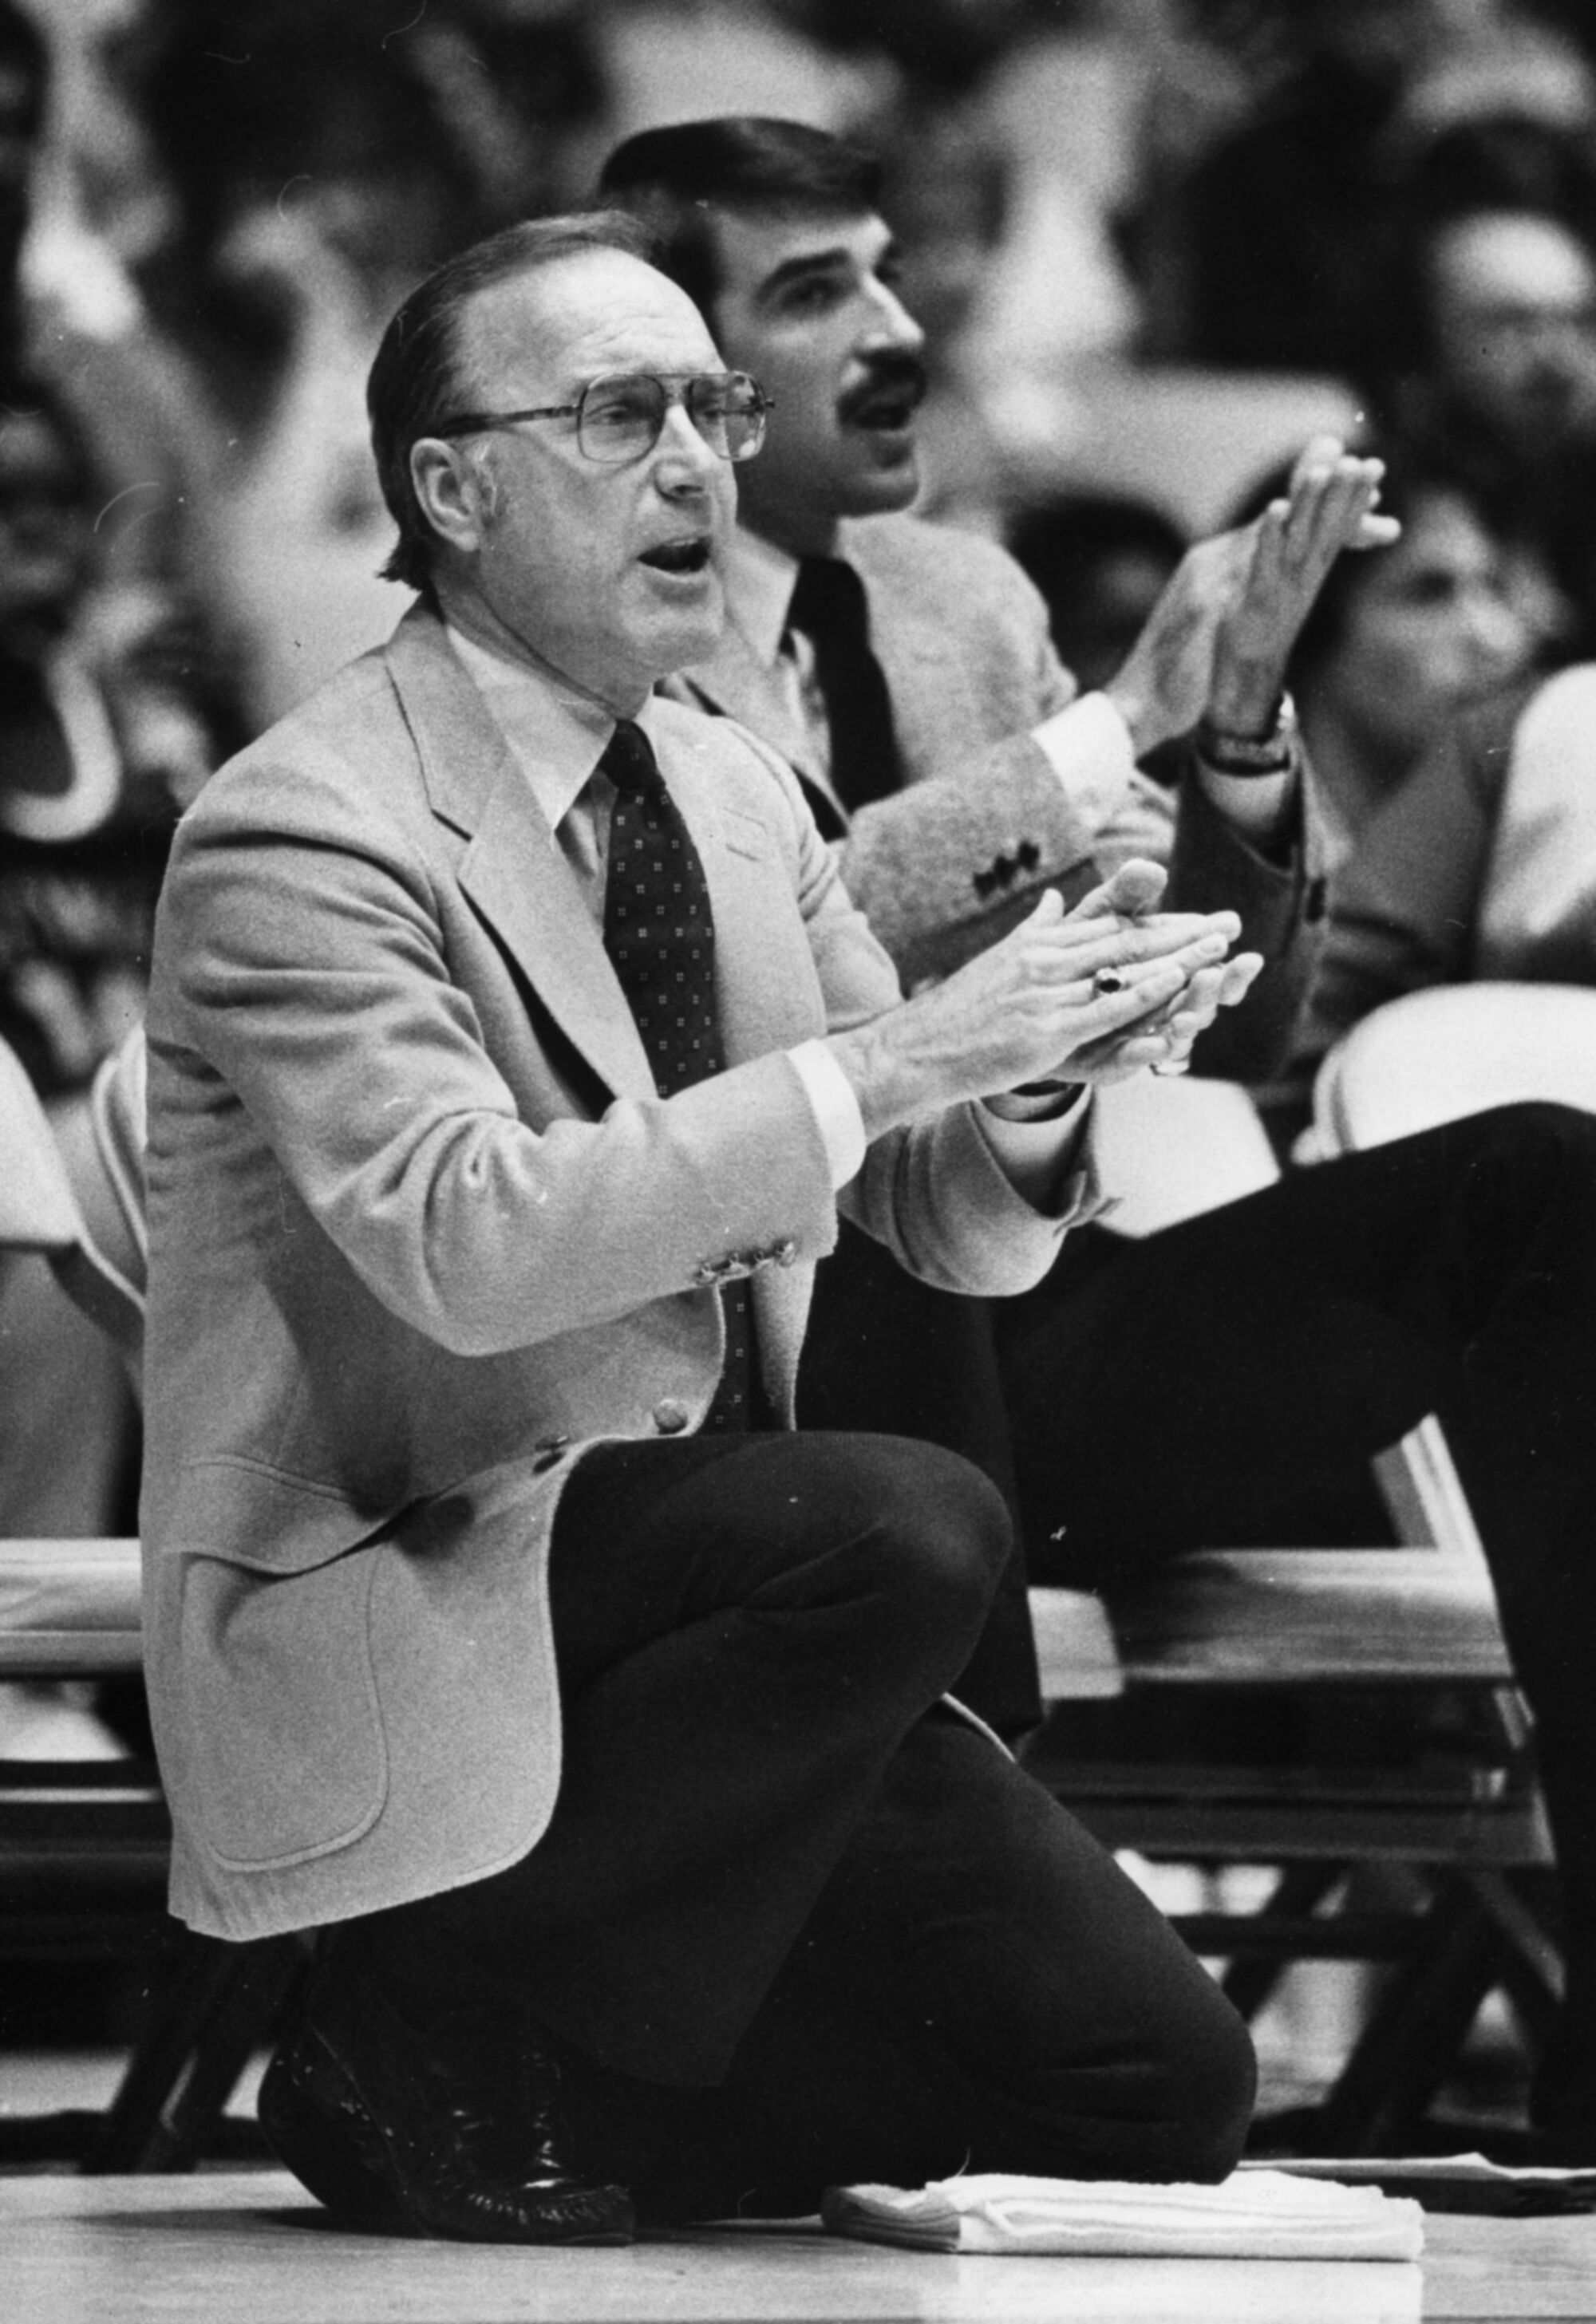 A man in glasses claps while kneeling on the basketball court sideline